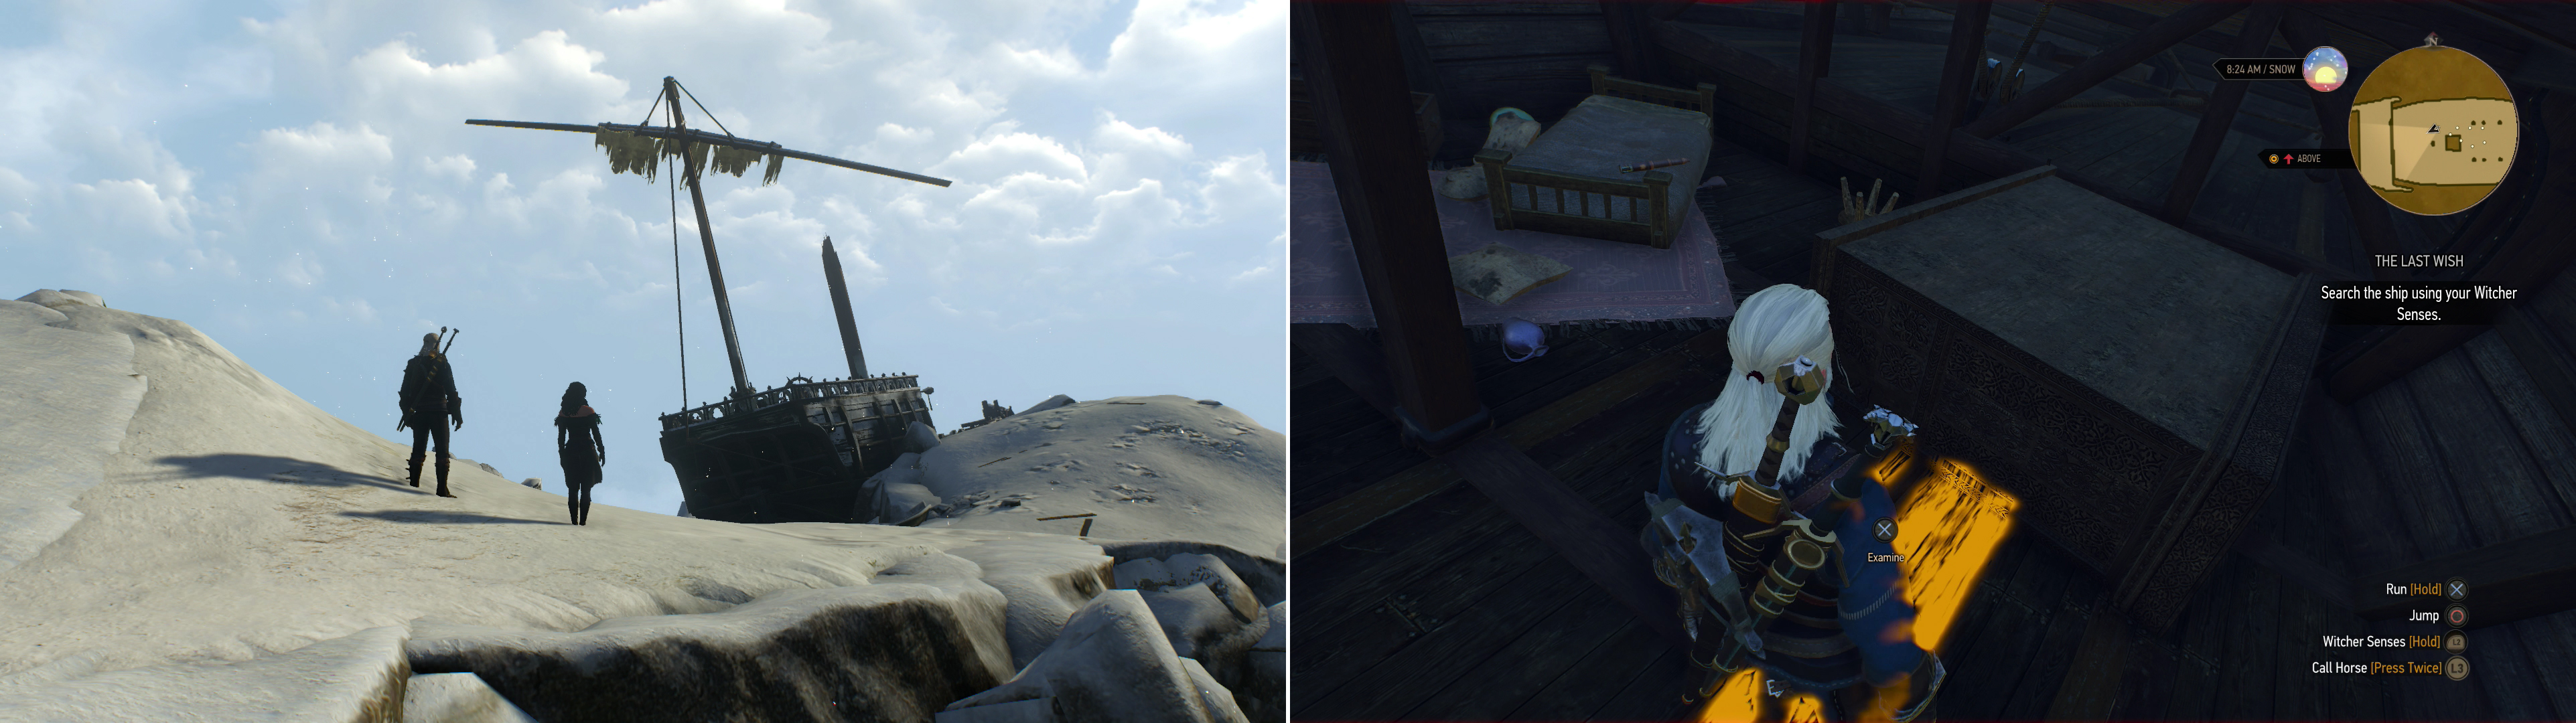 Find the other half of the mage's ship in a most unusual location (left), then search the ship to discover the mage's unfortunate fate (right).